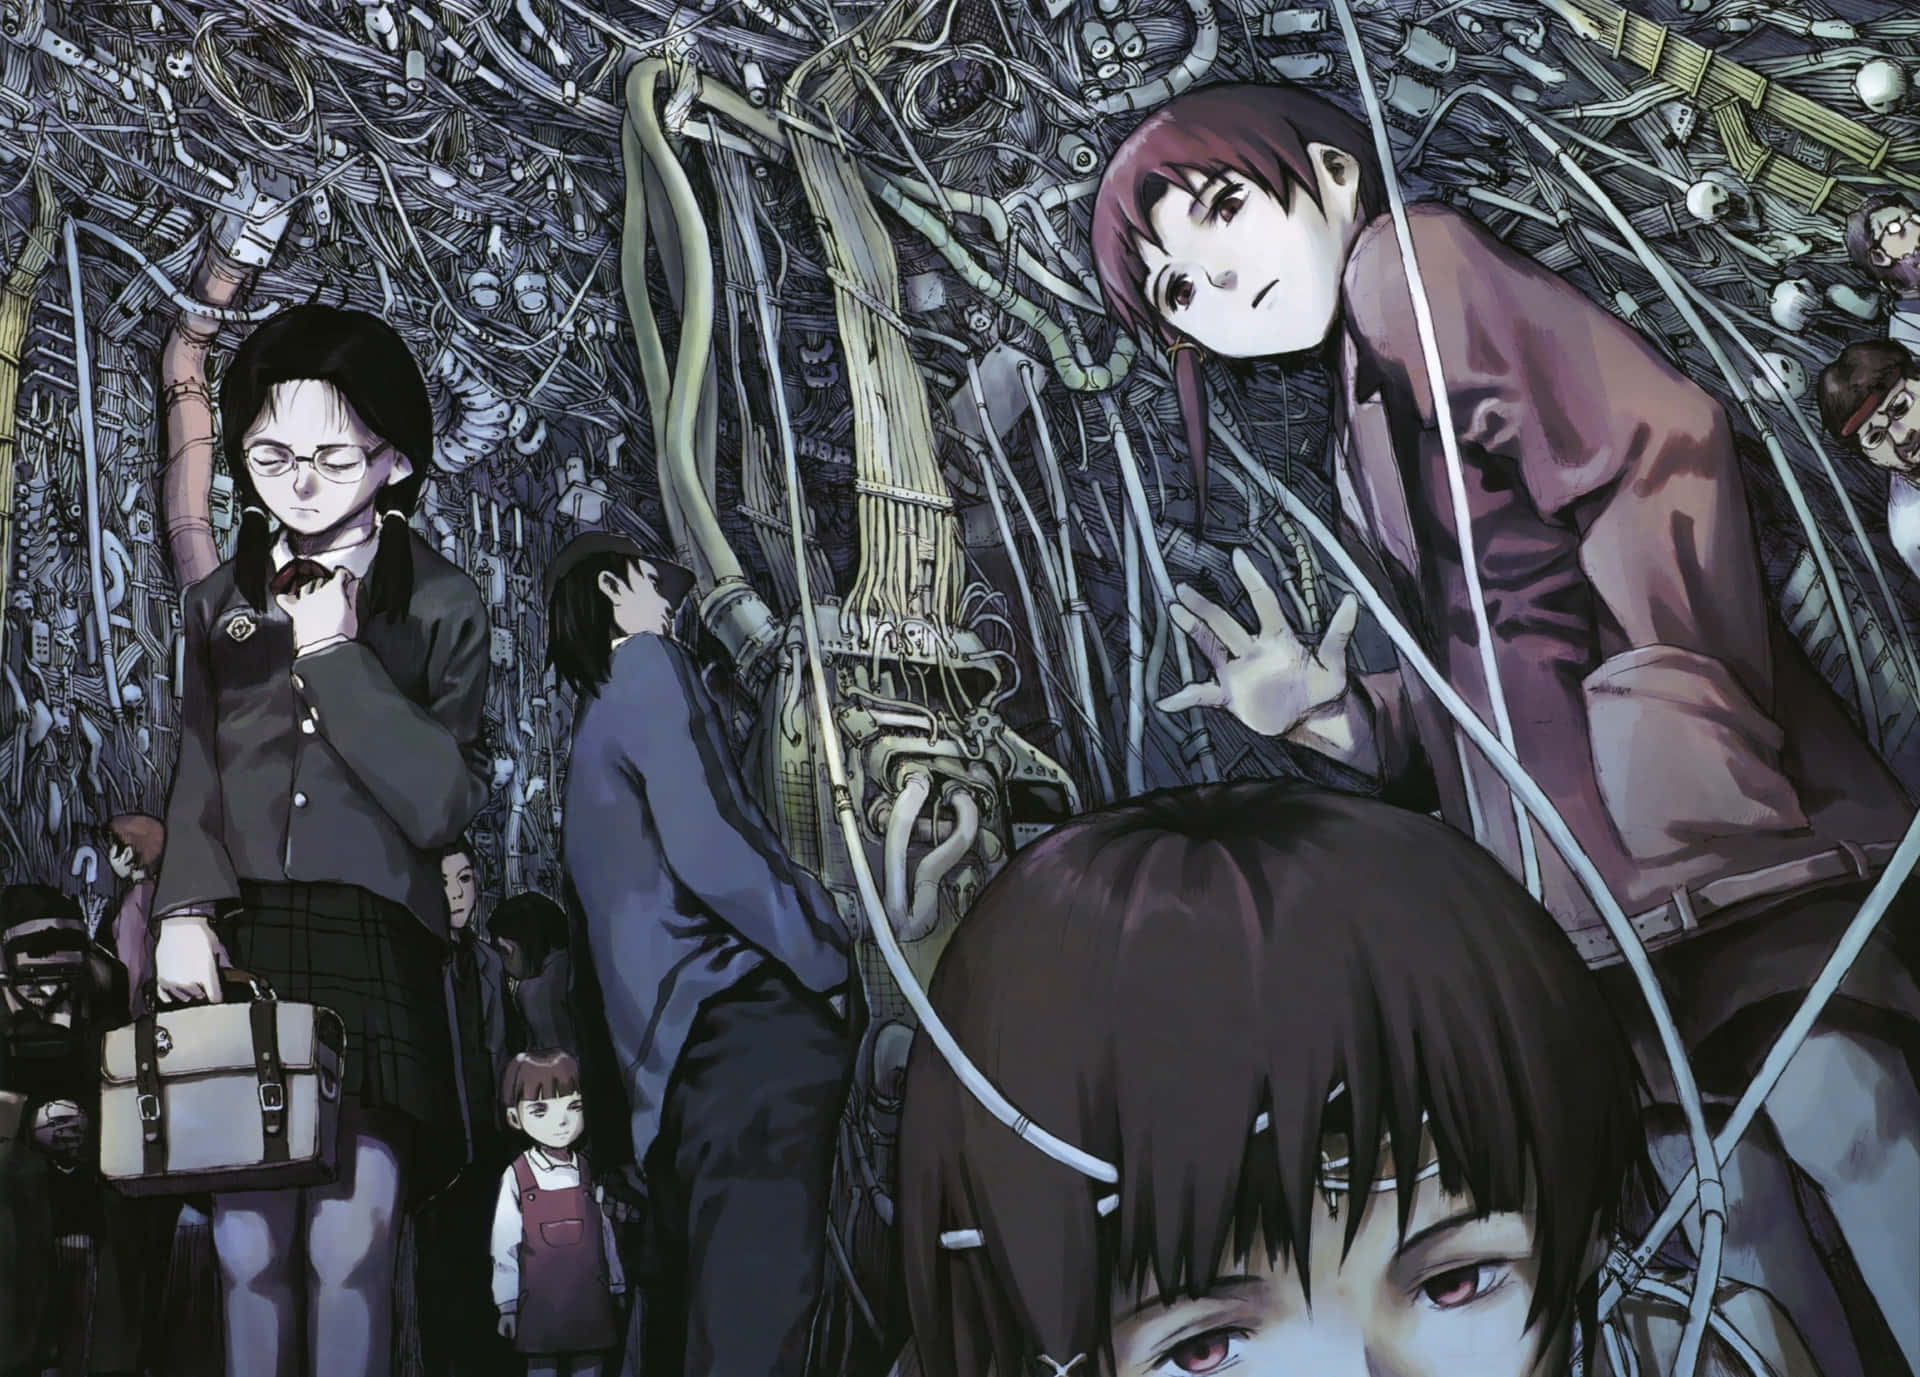 Discover The Technology, Mystery And Drama Of Serial Experiments Lain